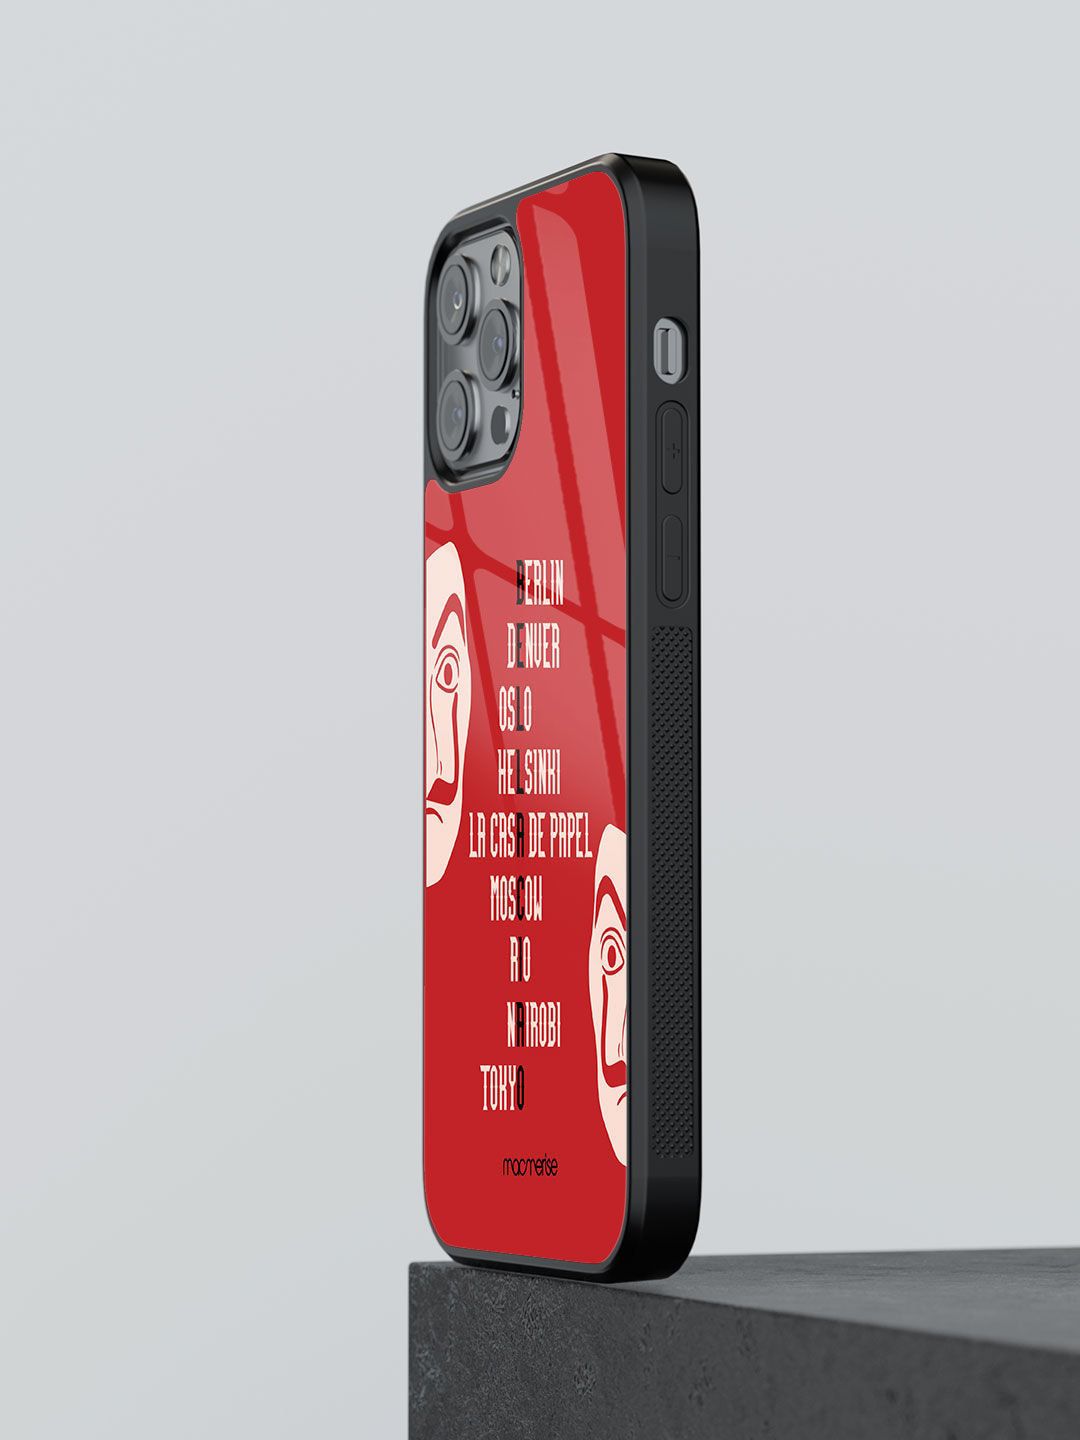 macmerise Red Printed Iphone 13 Pro Mobile Back Case Price in India